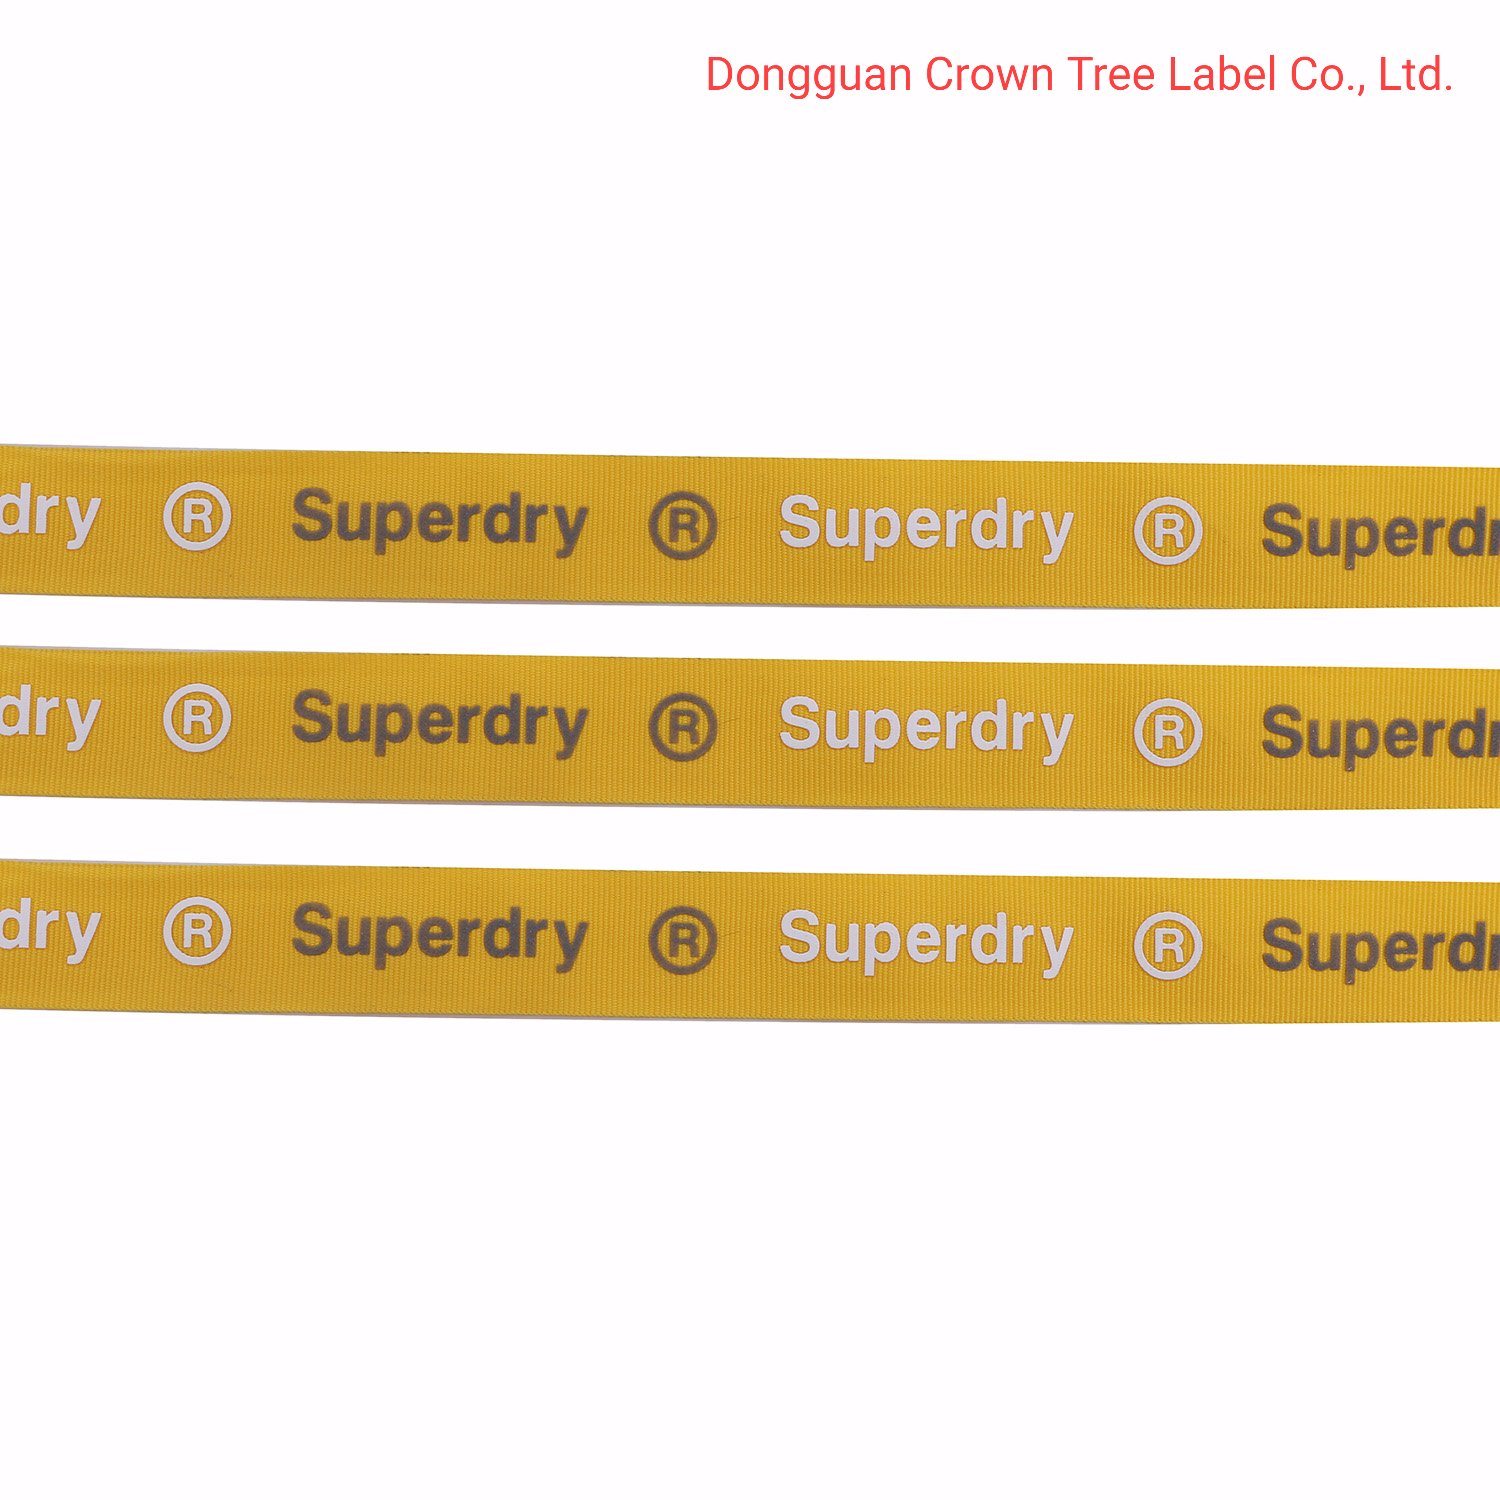 Superdry Weaving and 3D Silk-Screen Printing Woven Webbing